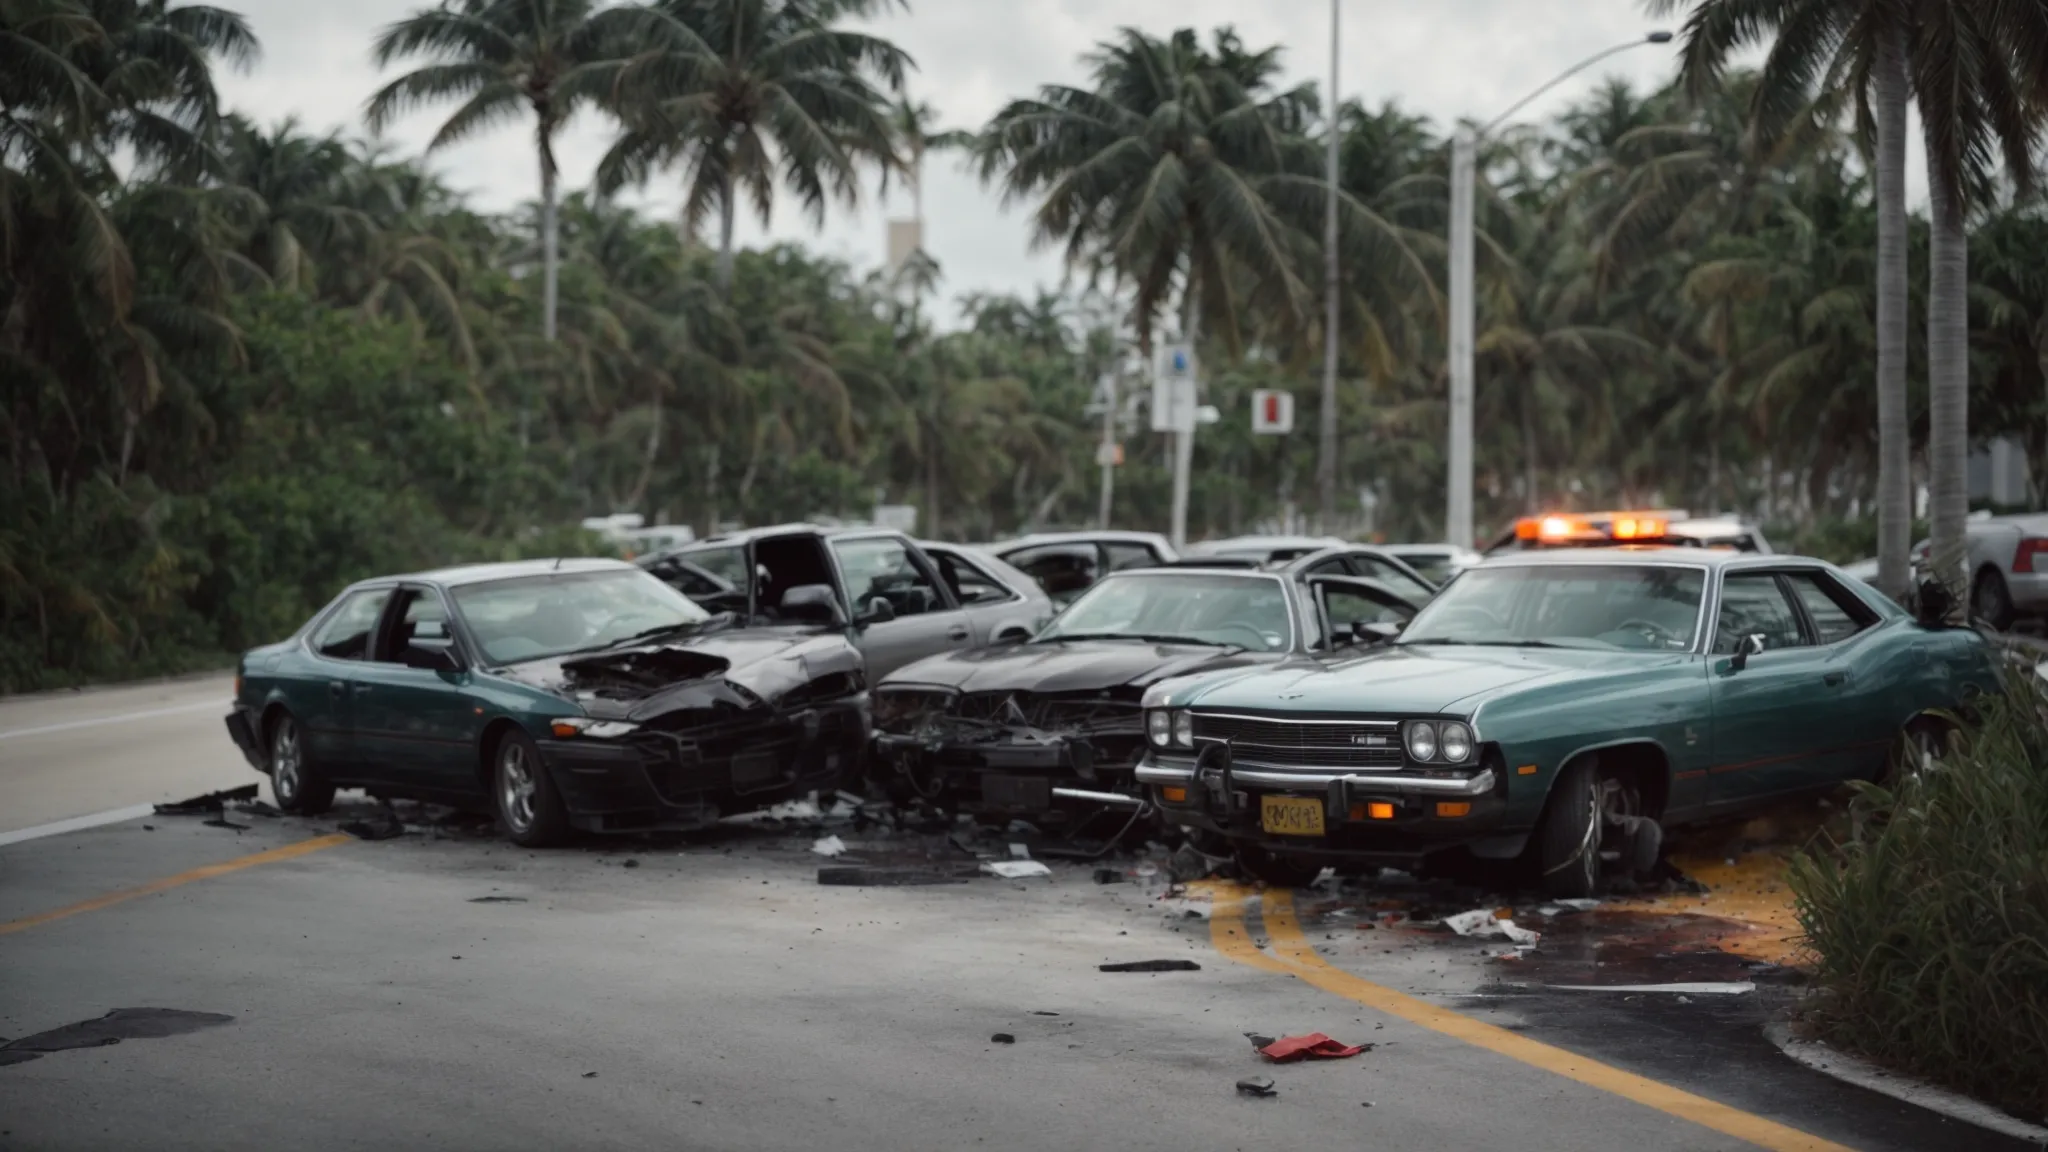 a car accident in miami with multiple vehicles involved but no visible brand logos or license plates.